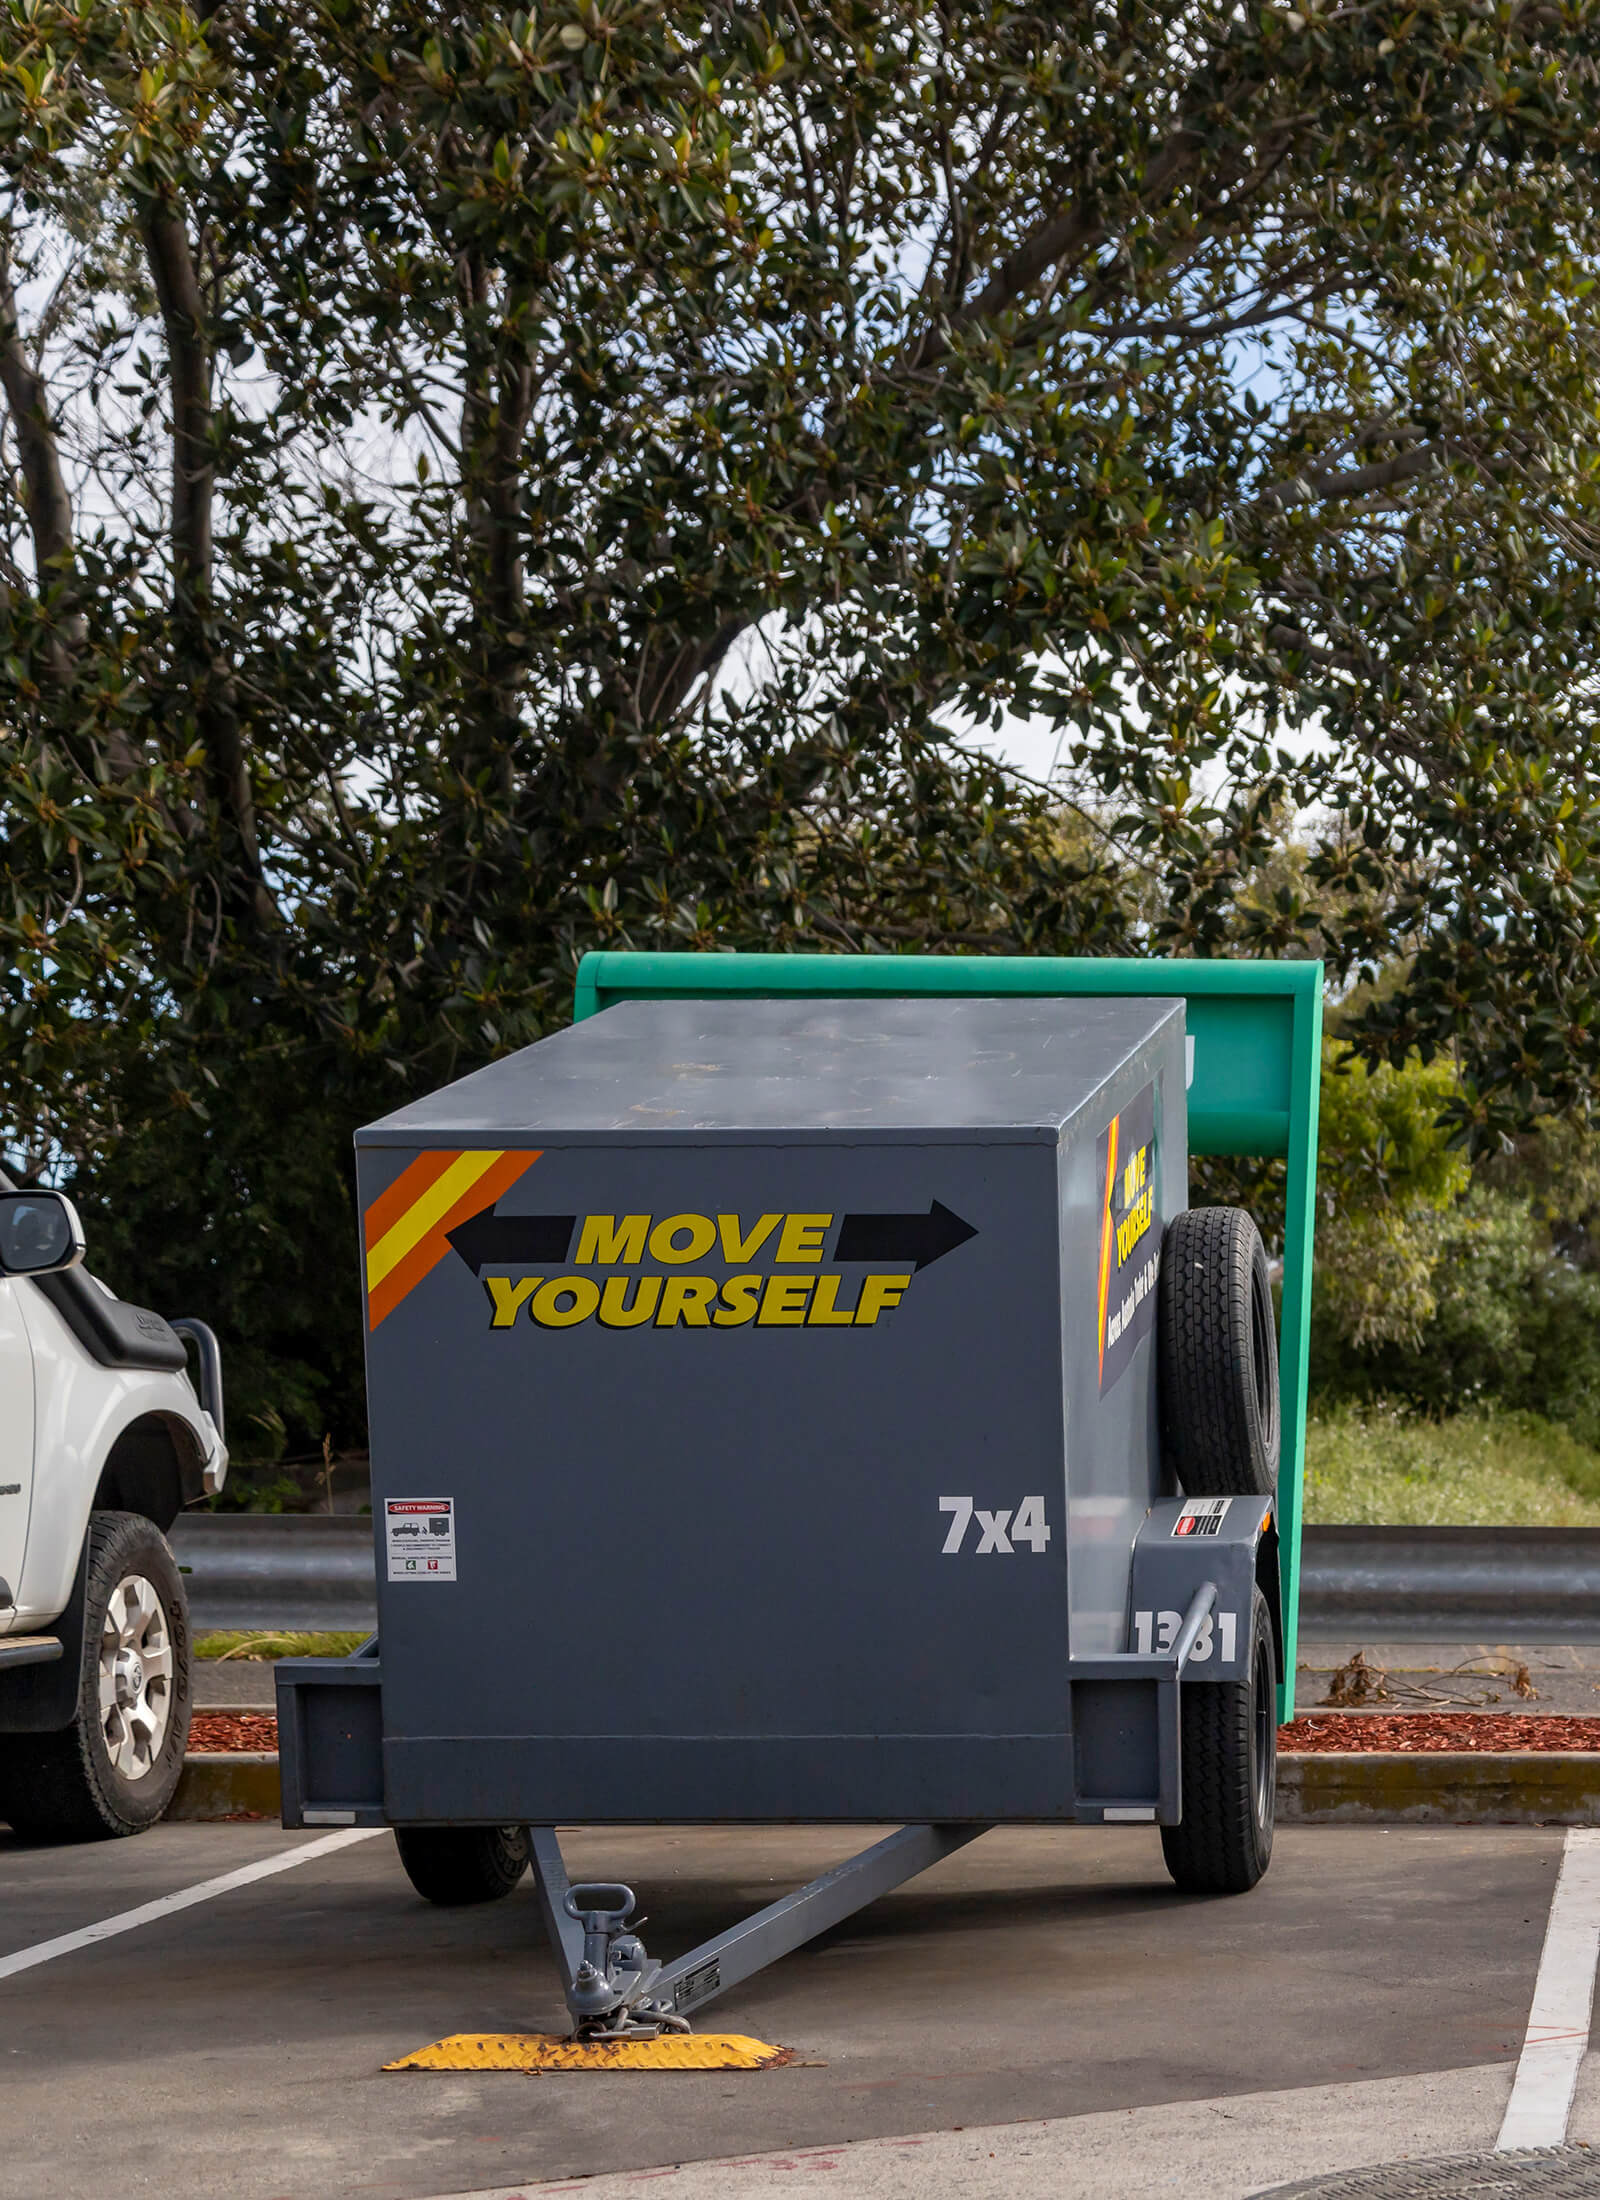 Move Yourself Trailer Hire - Built in Australia, our trailers give a smooth towing experience designed for tough Aussie roads